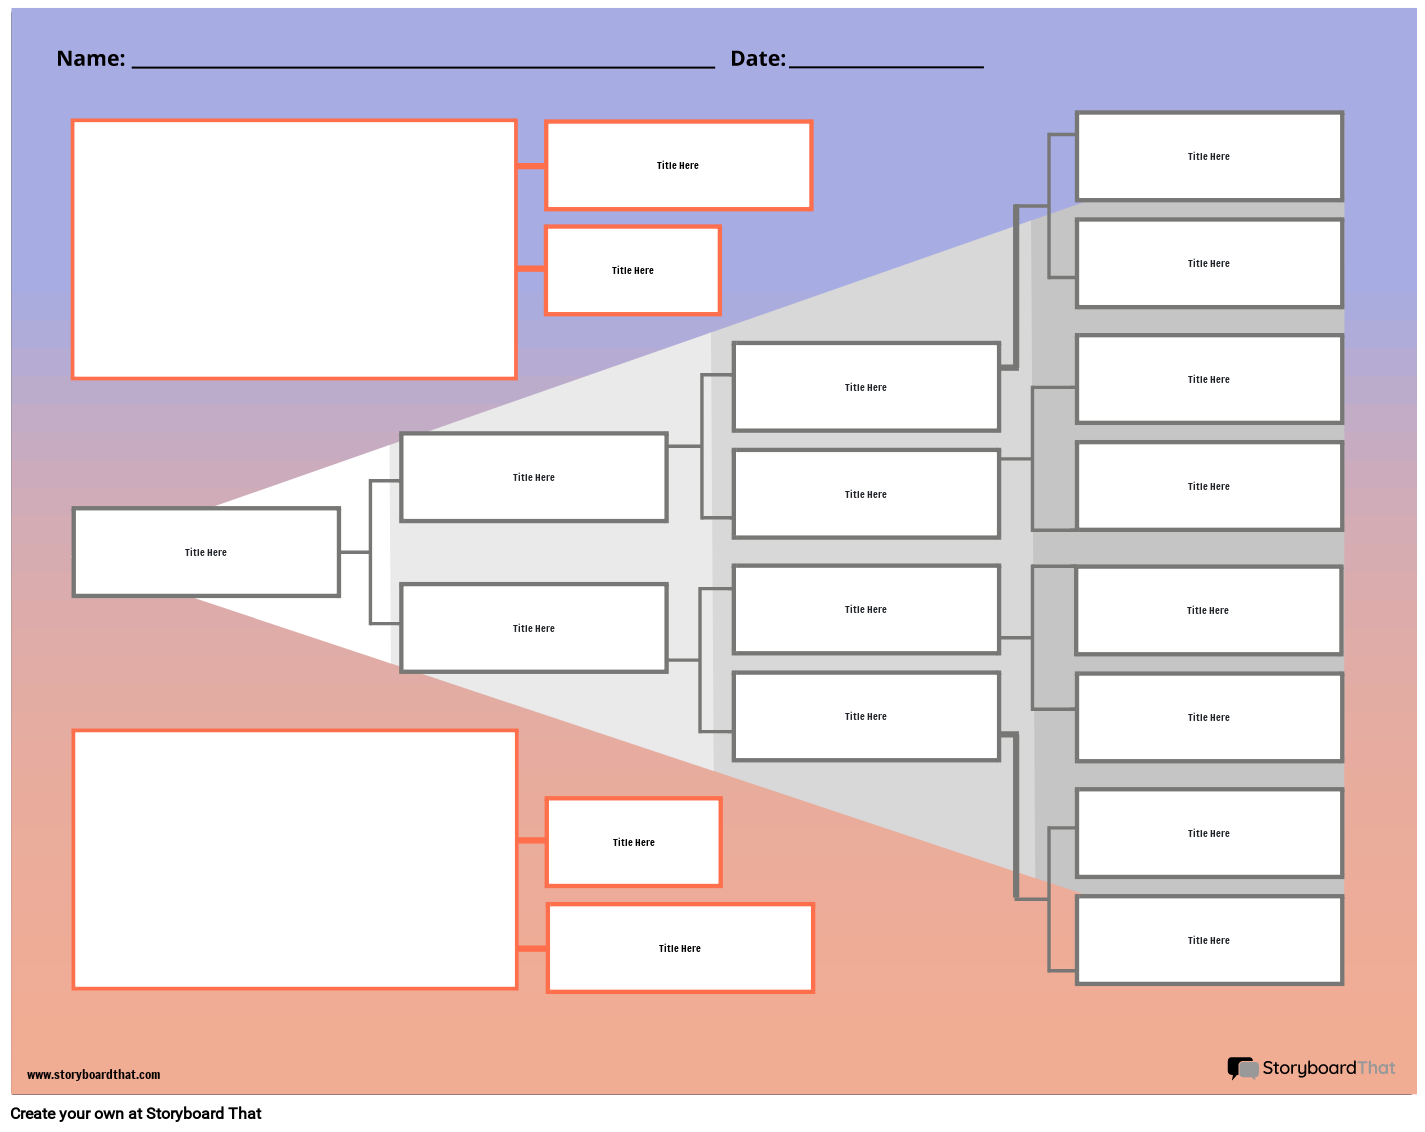 new-create-page-tree-diagram-template-1-storyboard